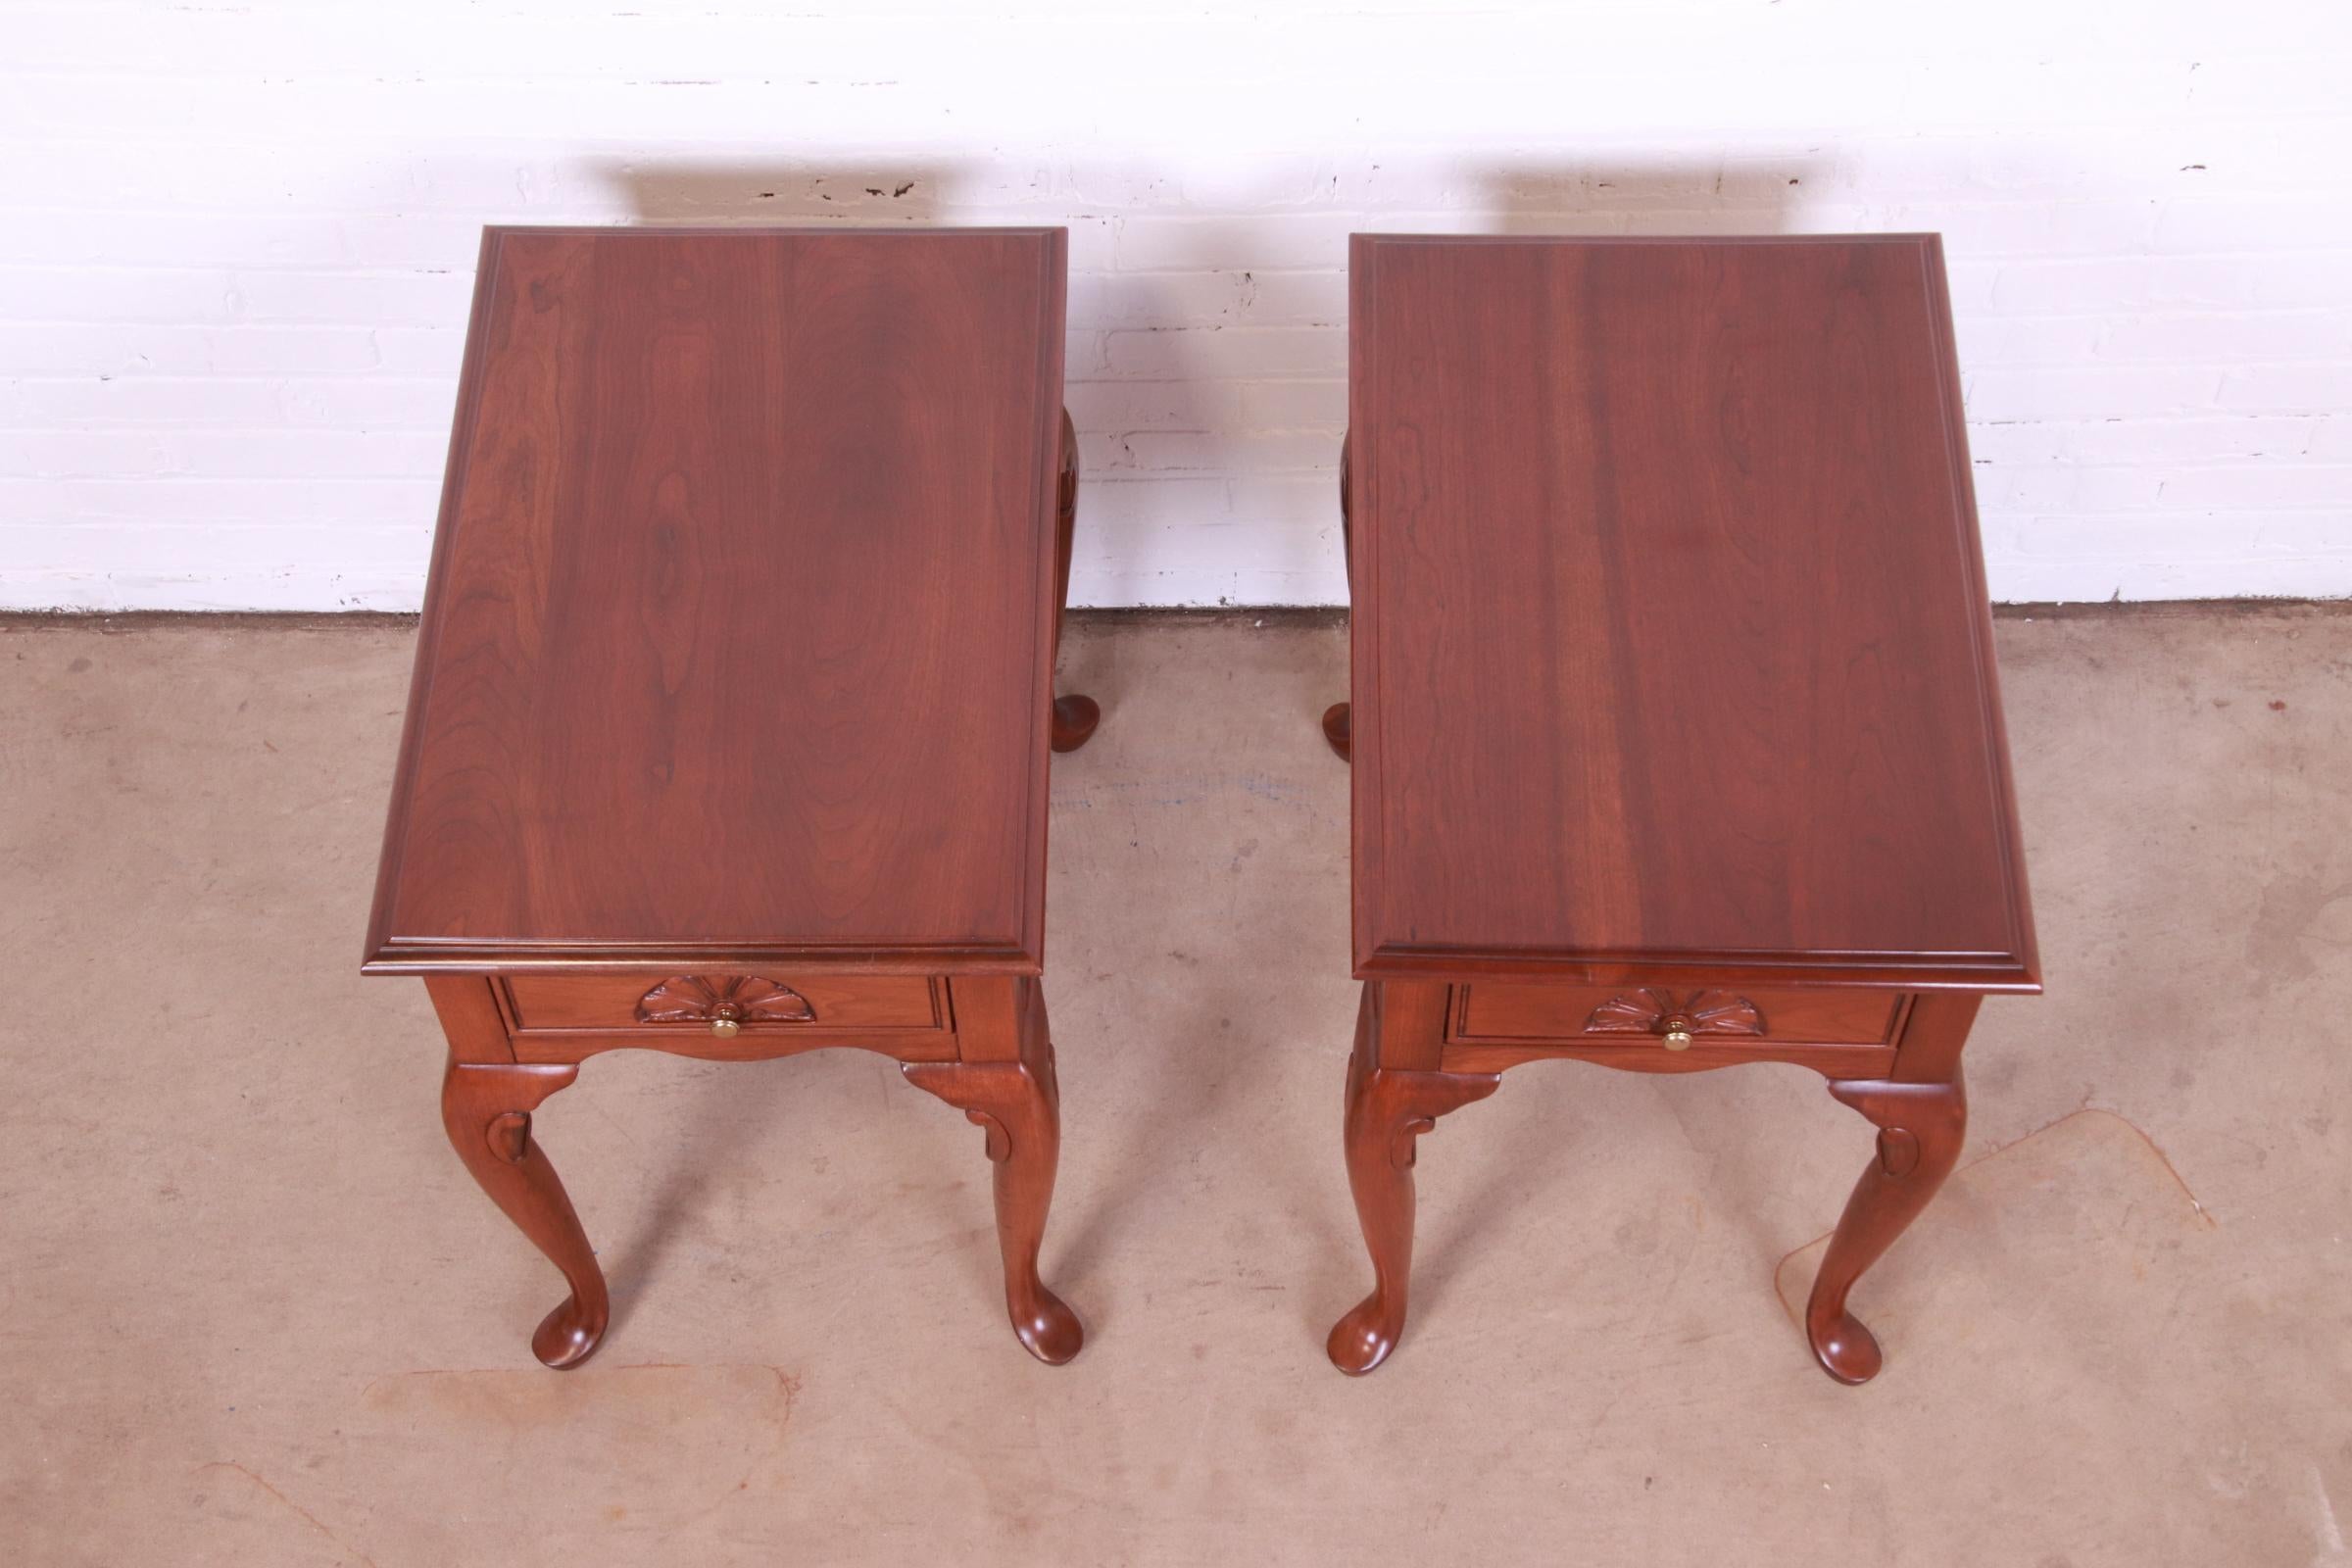 Harden Furniture Queen Anne Solid Cherry Wood Nightstands or End Tables, Pair For Sale 5